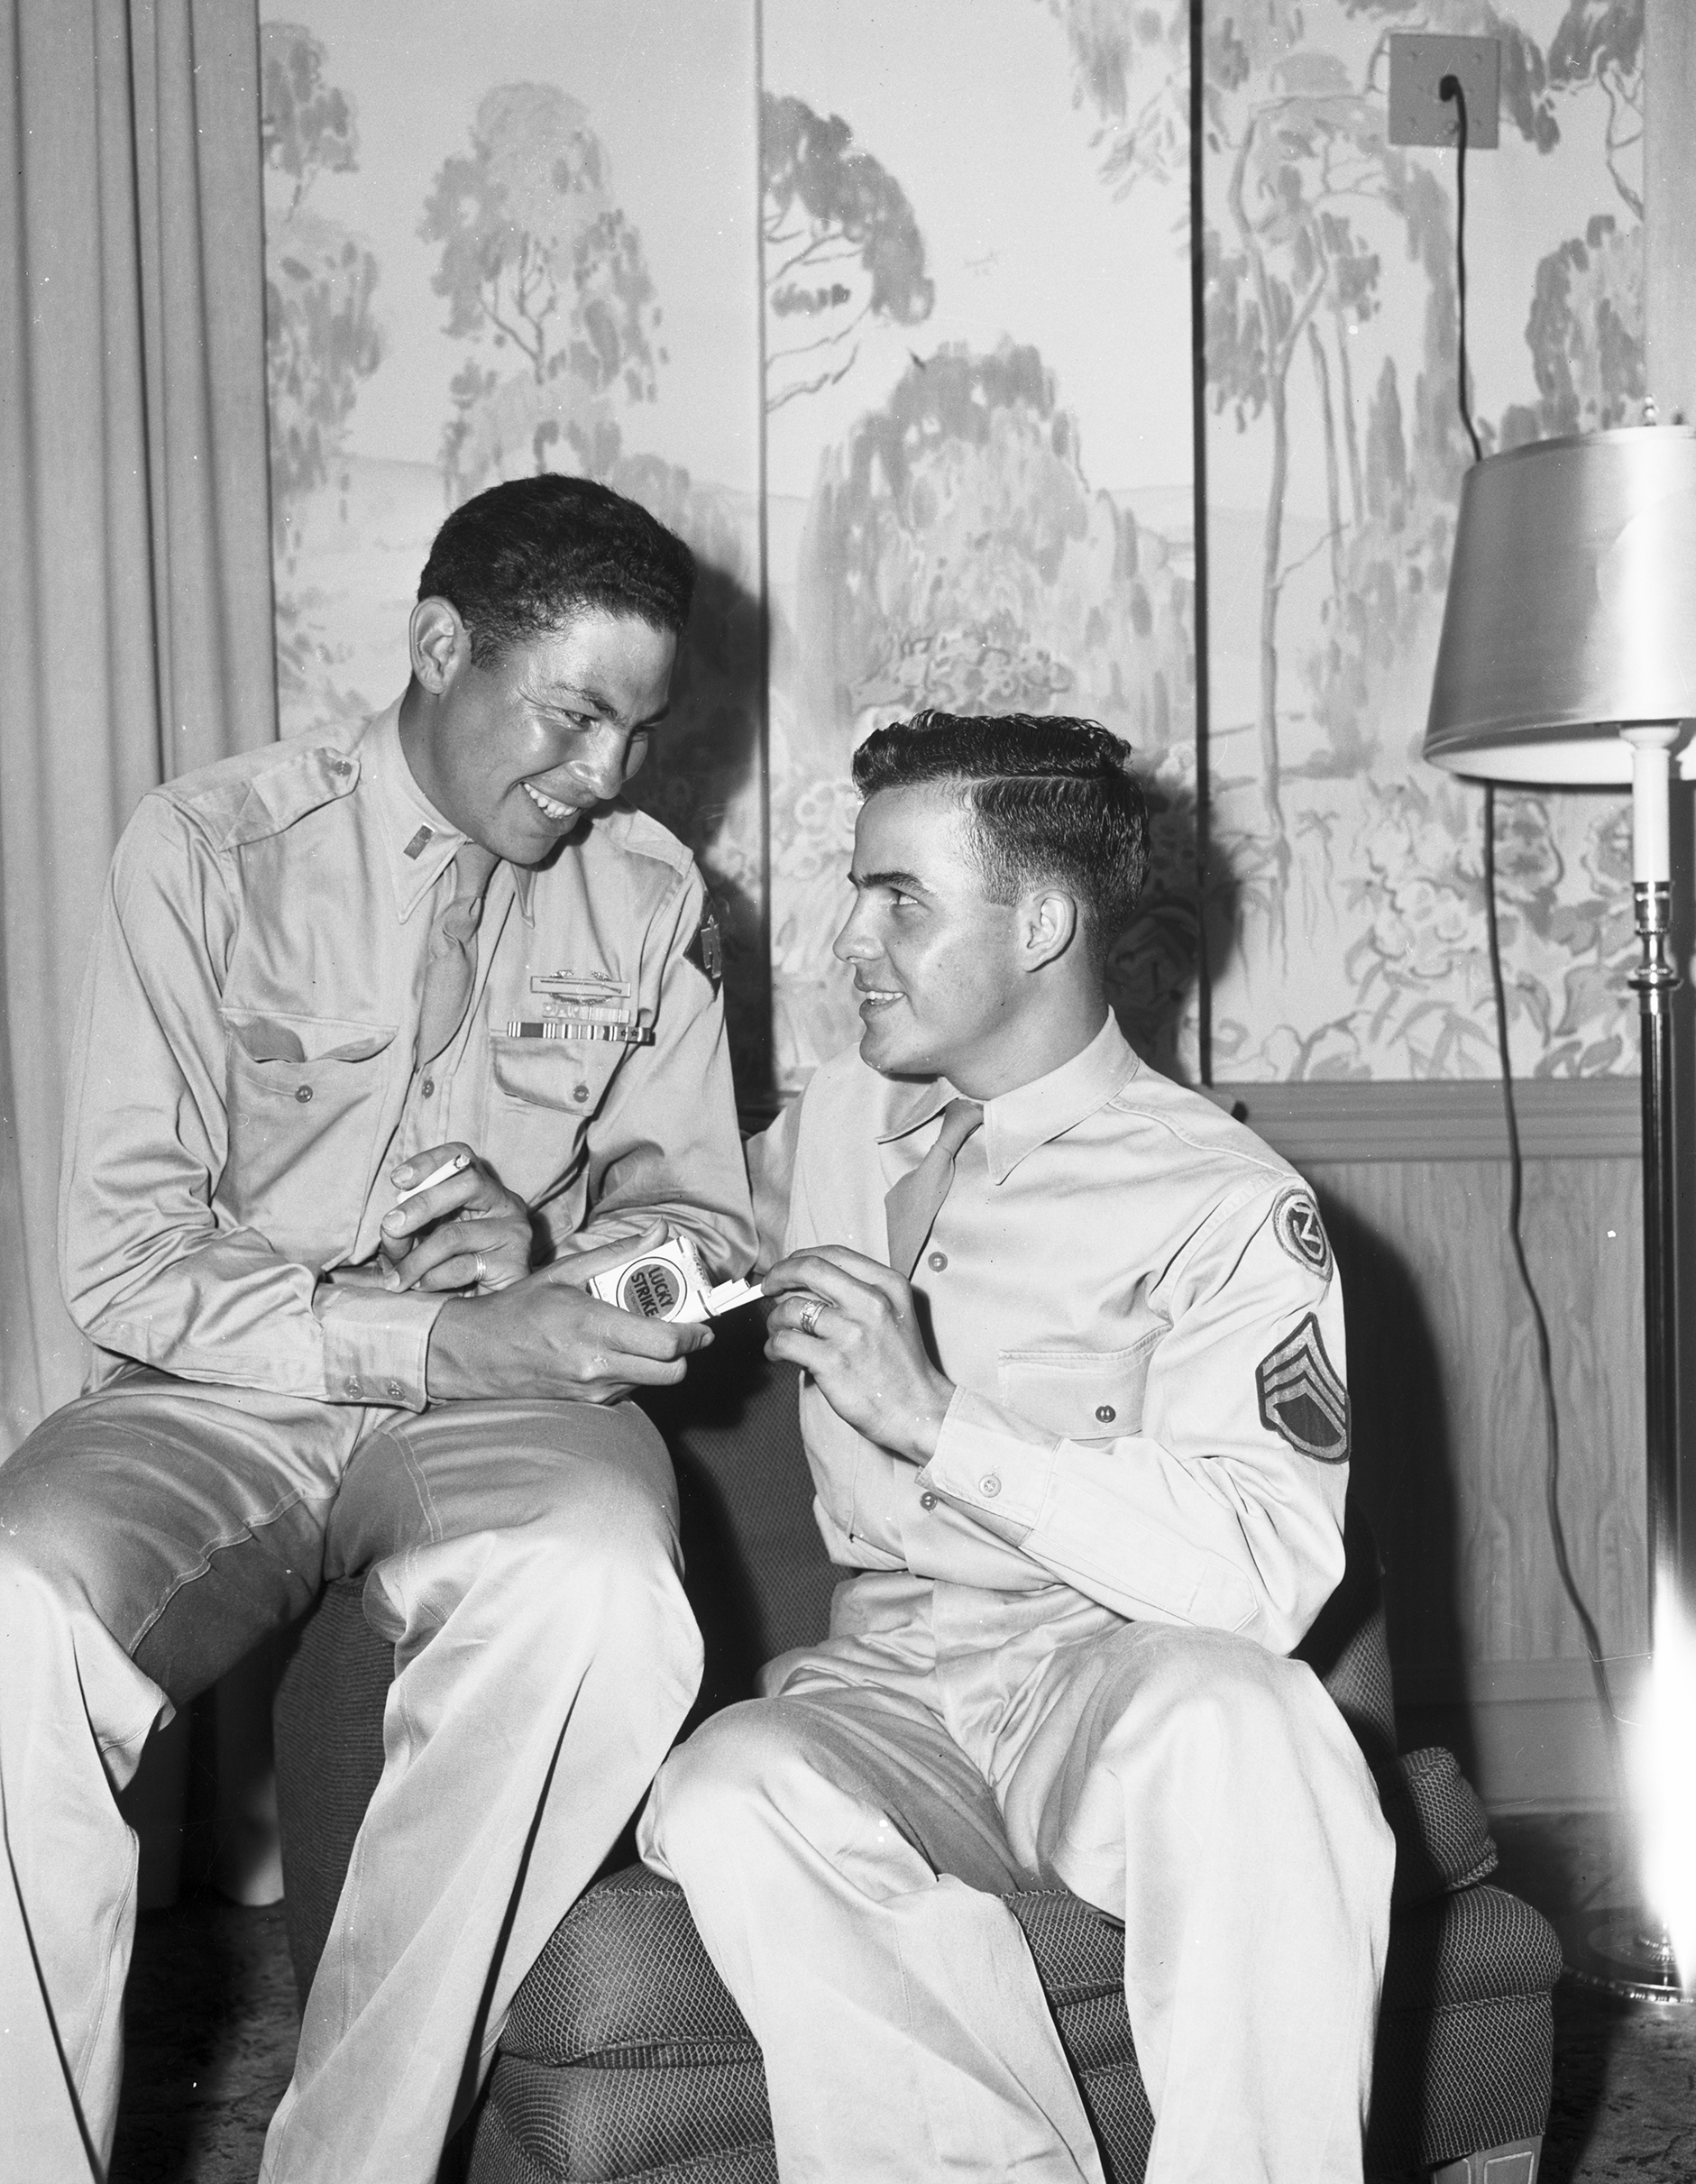 Lieutenant Ernest Childers and Sergeant Bill Goforth. Two Indigenous men in World War II army uniforms sitting together and sharing cigarettes. 